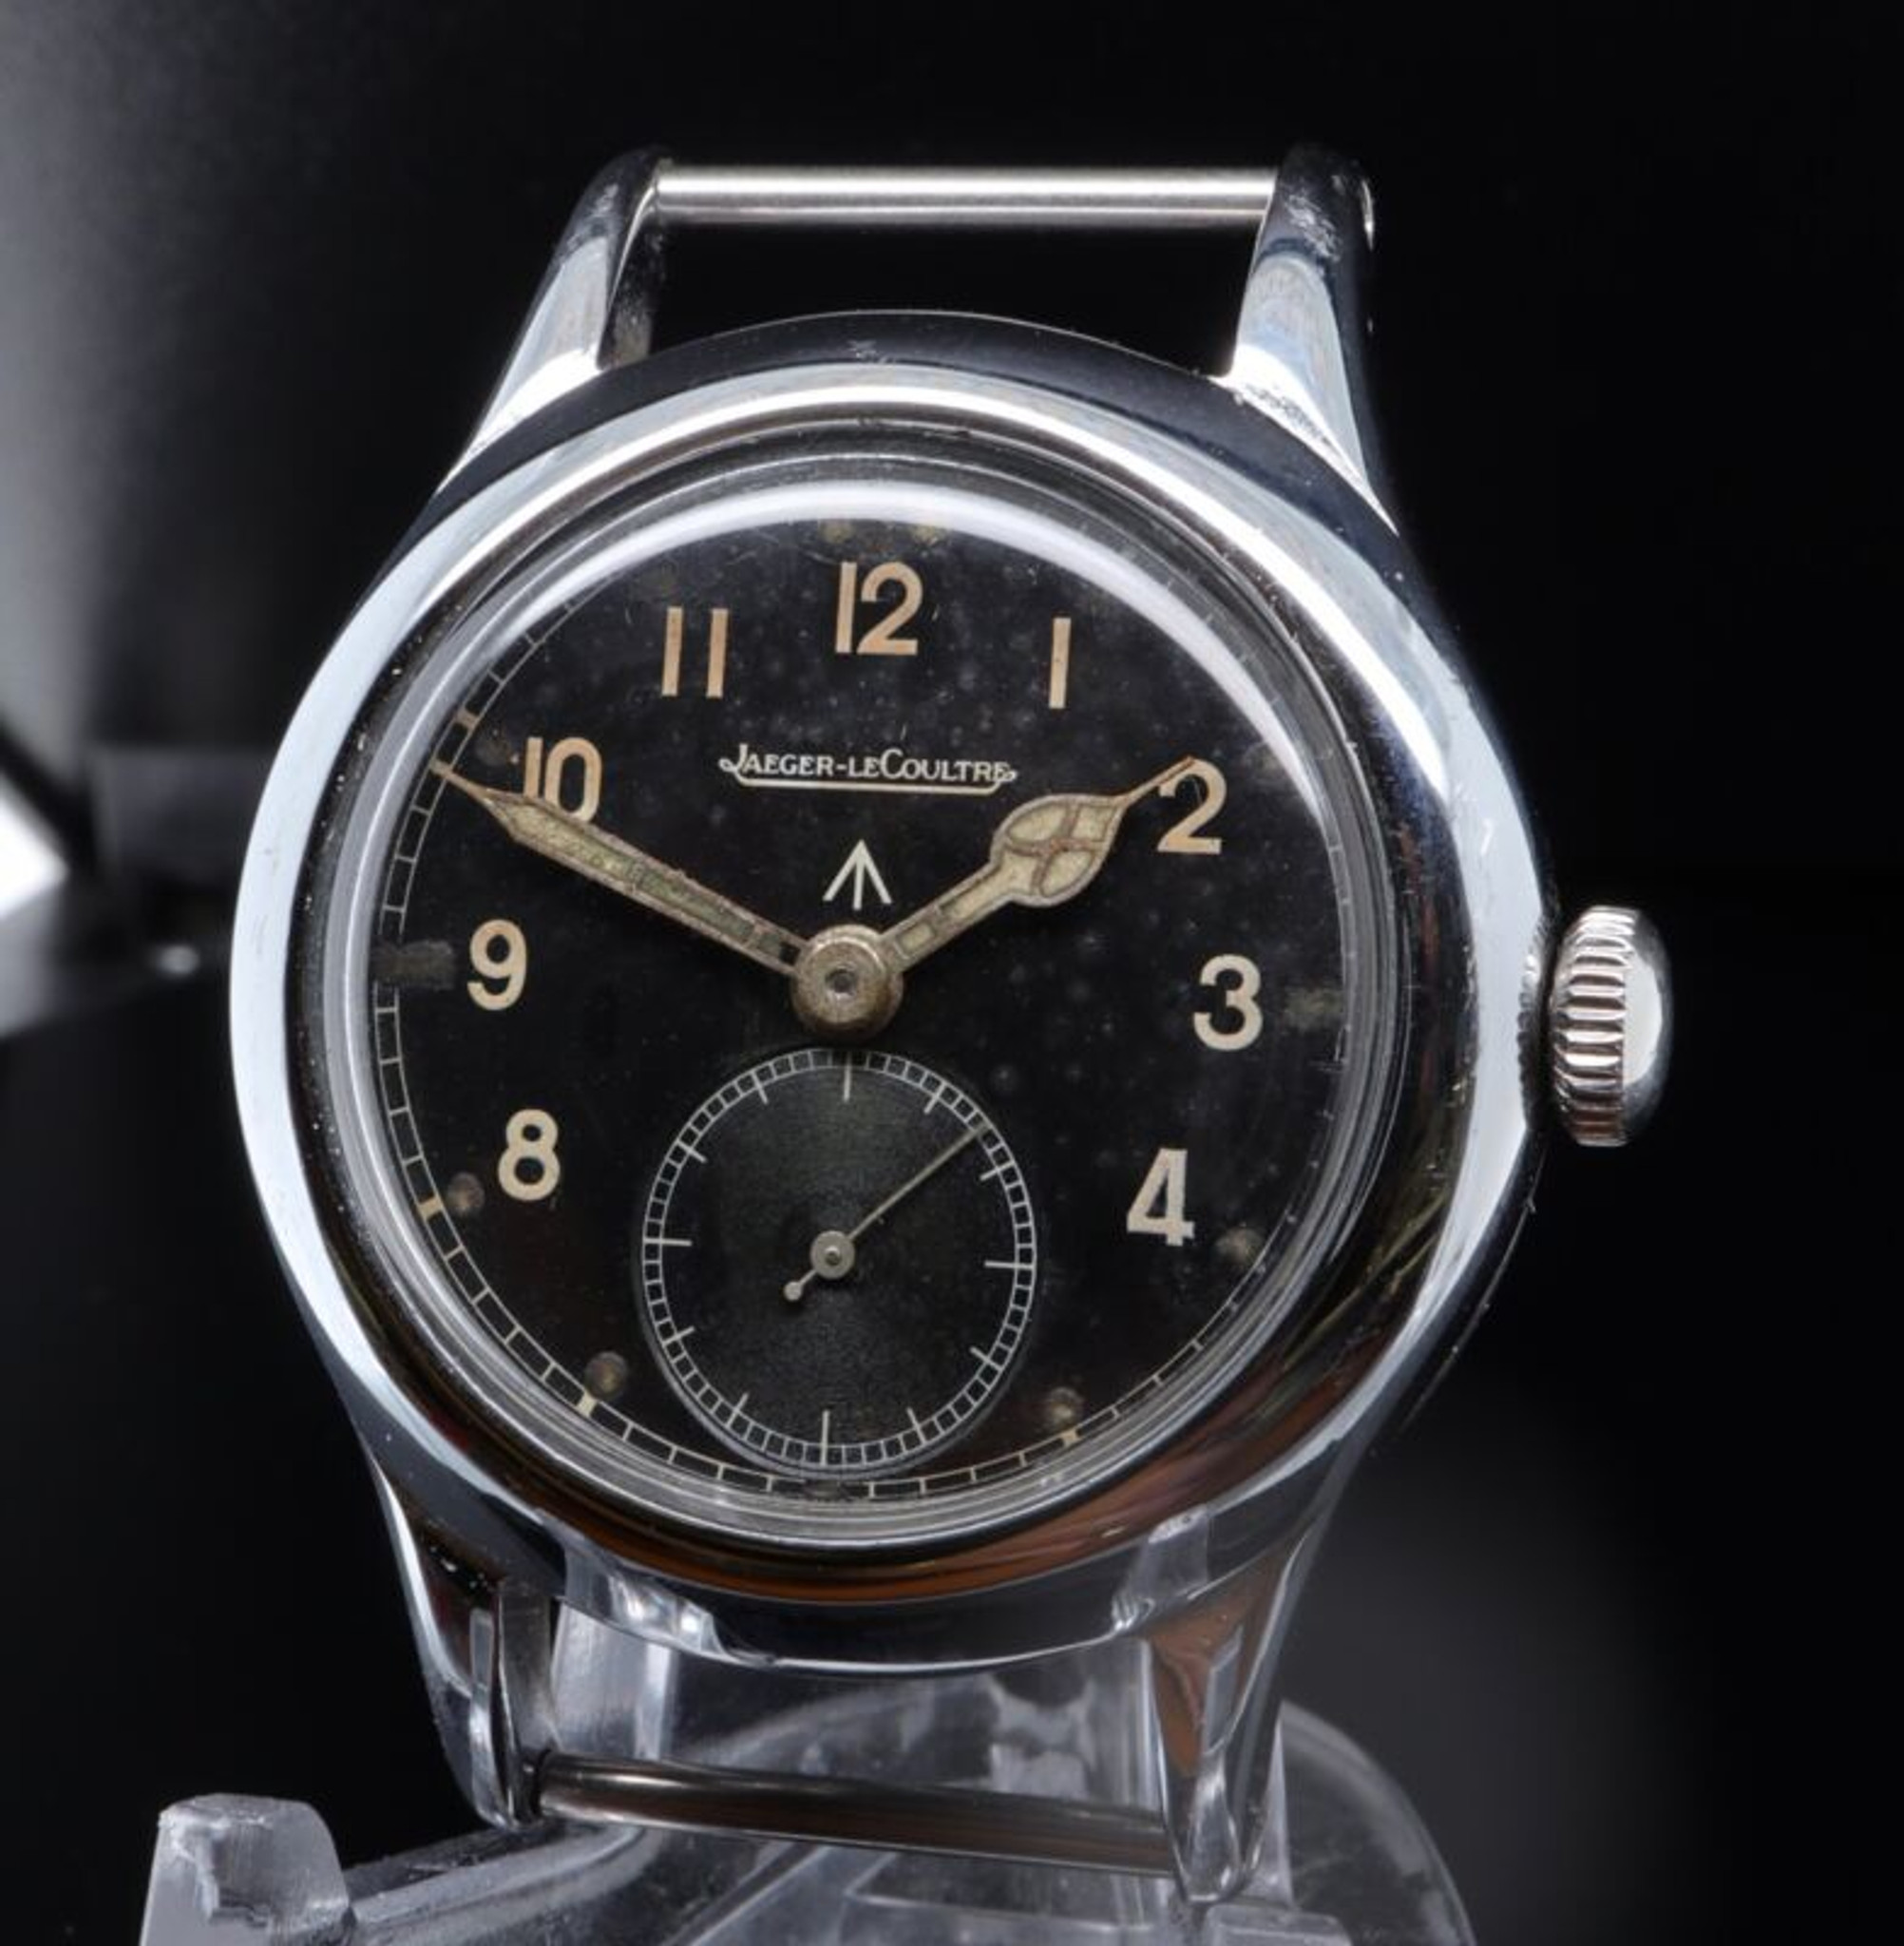 Vintage Jaeger-LeCoultre Military watch Issued to Australian Army circa ...